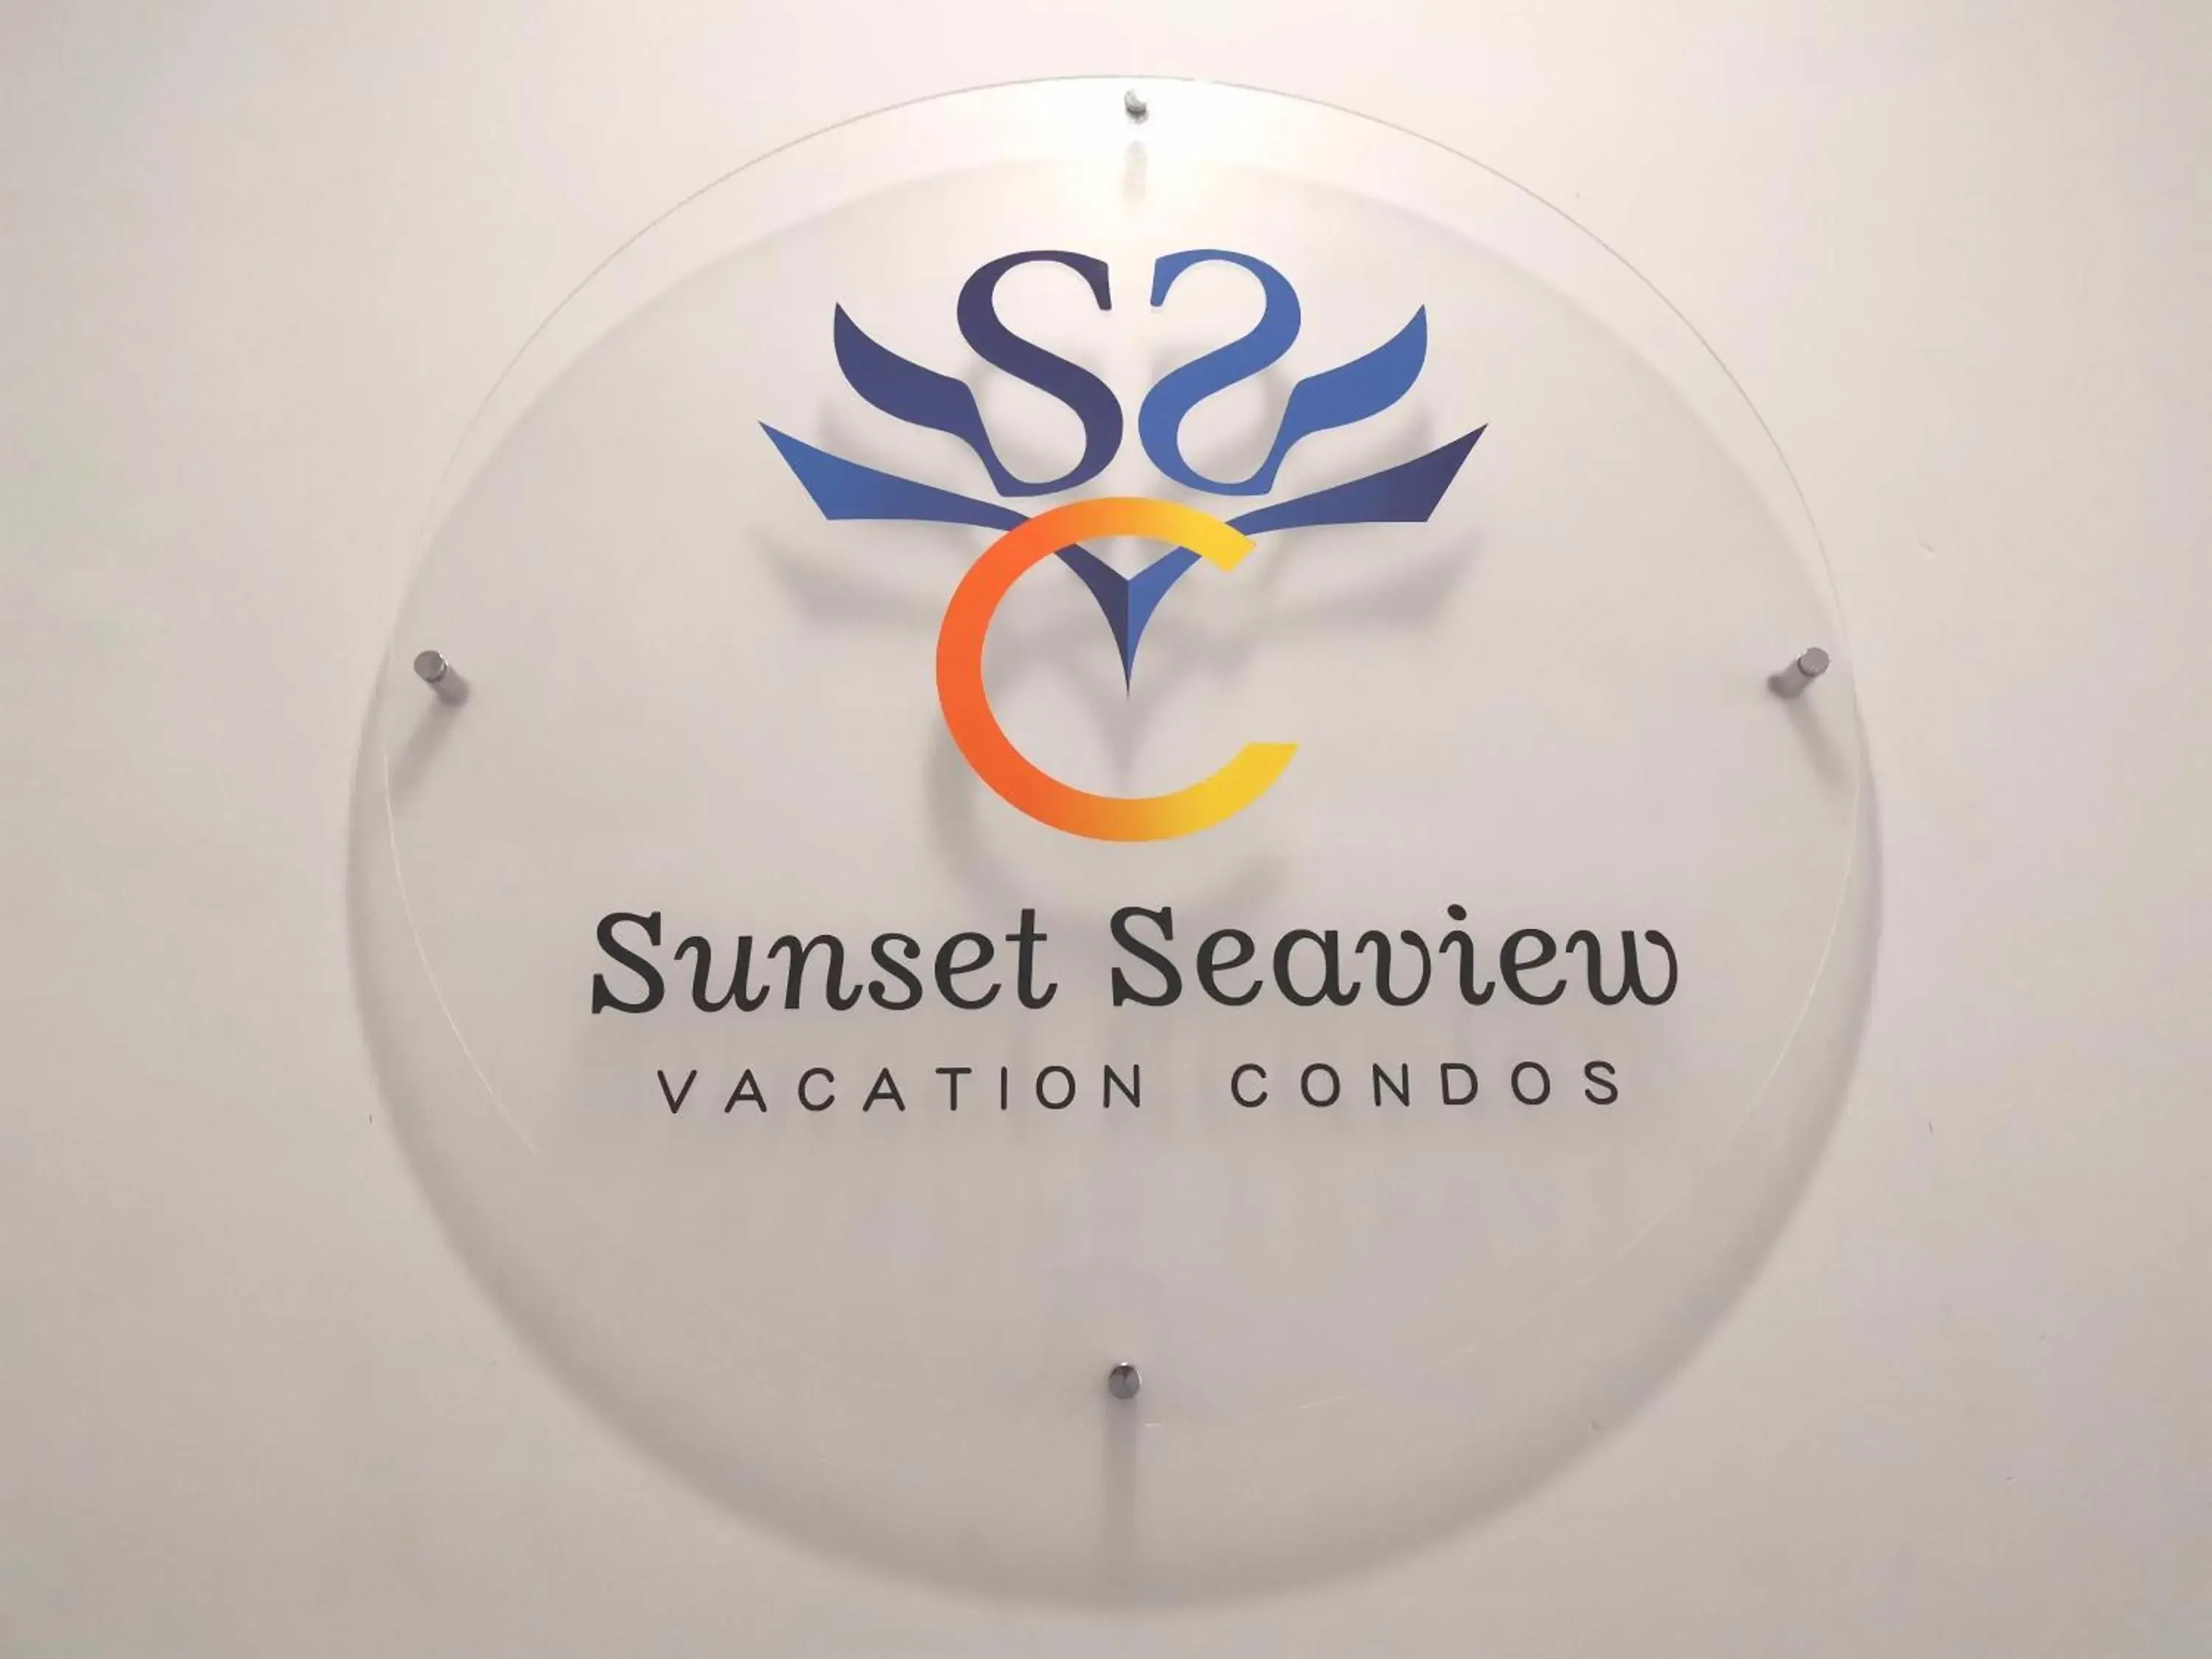 Property logo or sign in Sunset Seaview Vacation Condos @ IMAGO Shopping Mall